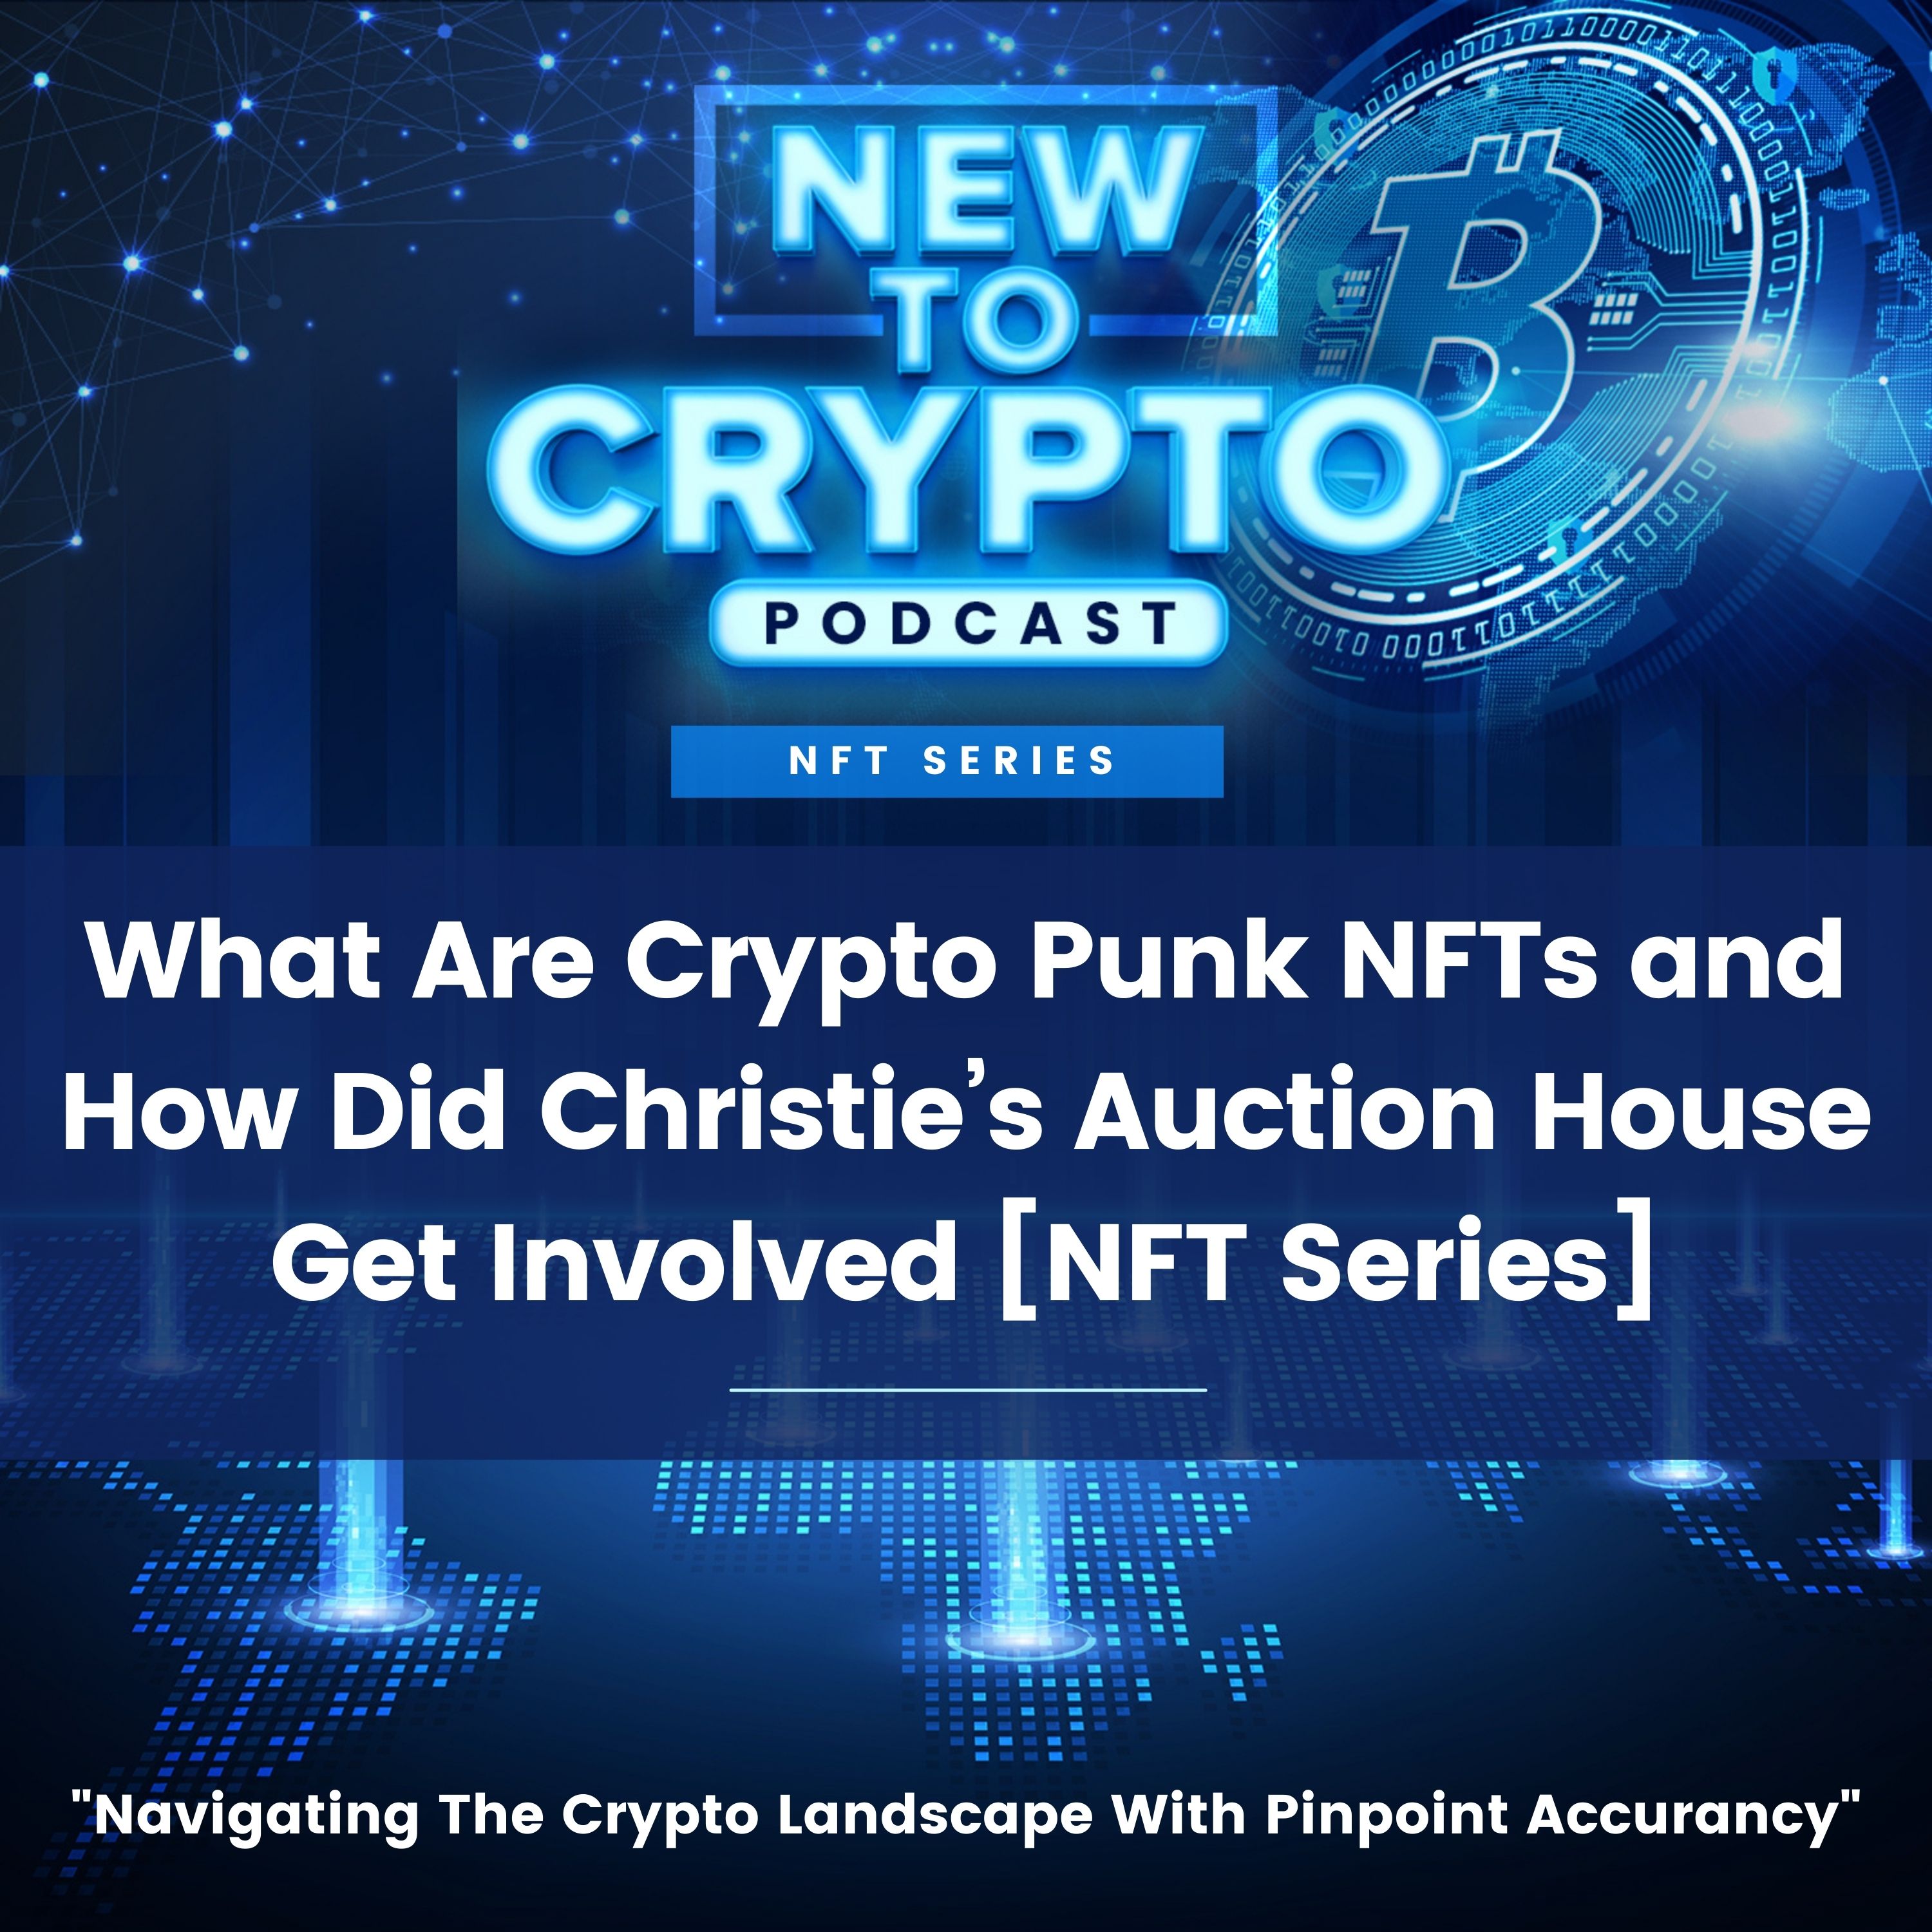 What Are Crypto Punk NFTs and How Did Christie’s Auction House Get Involved